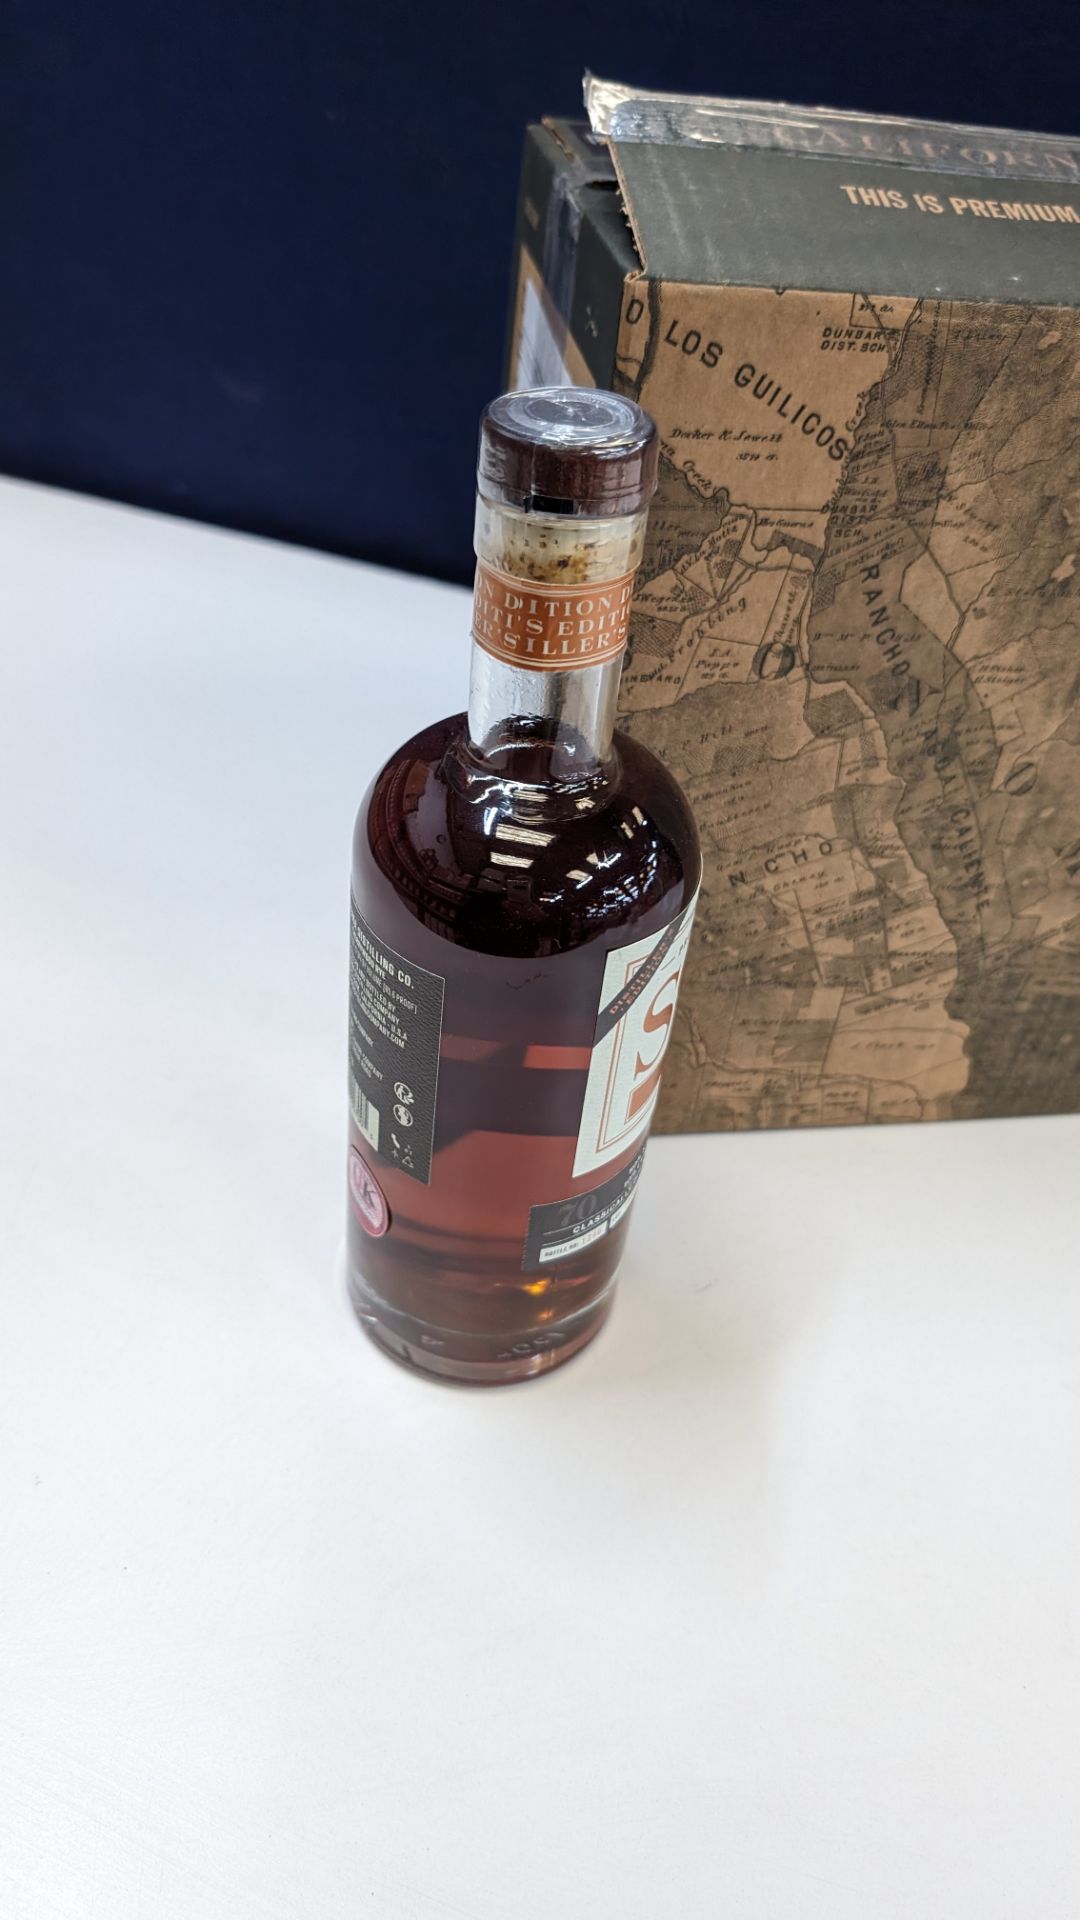 6 off 700ml bottles of Sonoma Cherrywood Rye Whiskey. In Sonoma branded box which includes bottling - Image 6 of 6